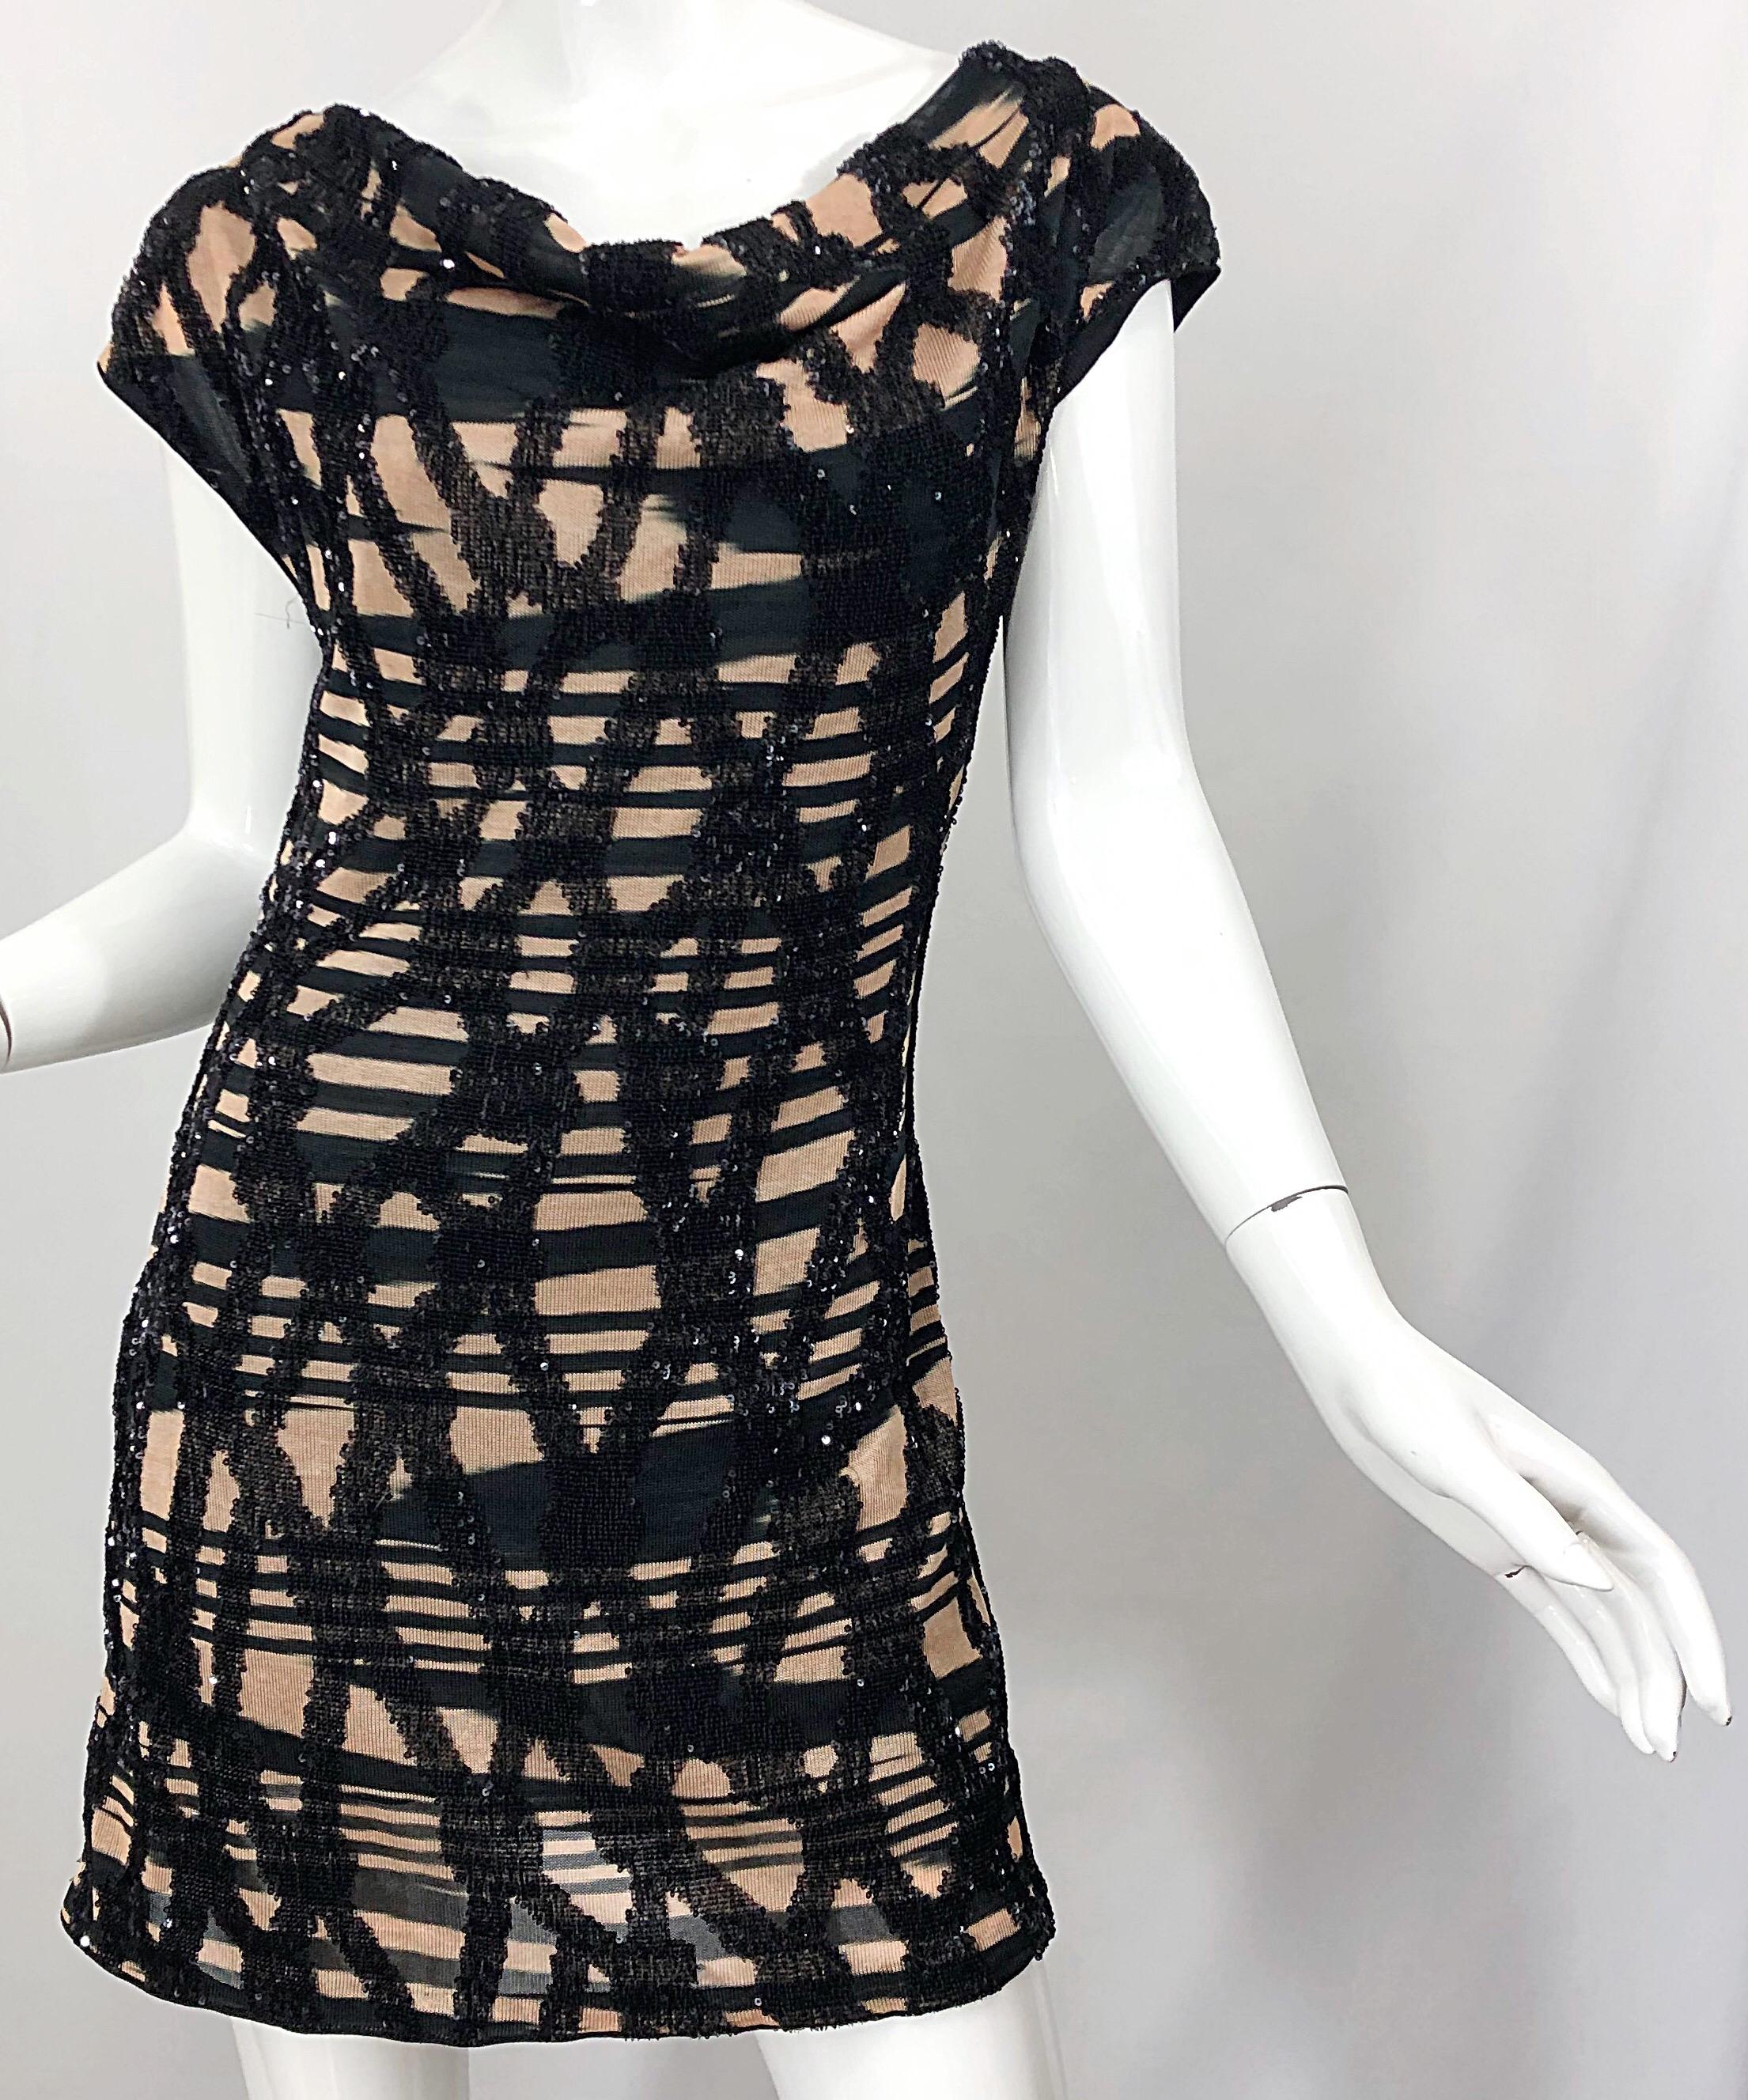 Chic early 2000s MISSONI Orange Label black and nude sequined abstract mini dress! Features signature Missoni knit jersey with an attached slip lining. Flattering striped abstract design with thousands of hand-sewn black sequins in a variety of